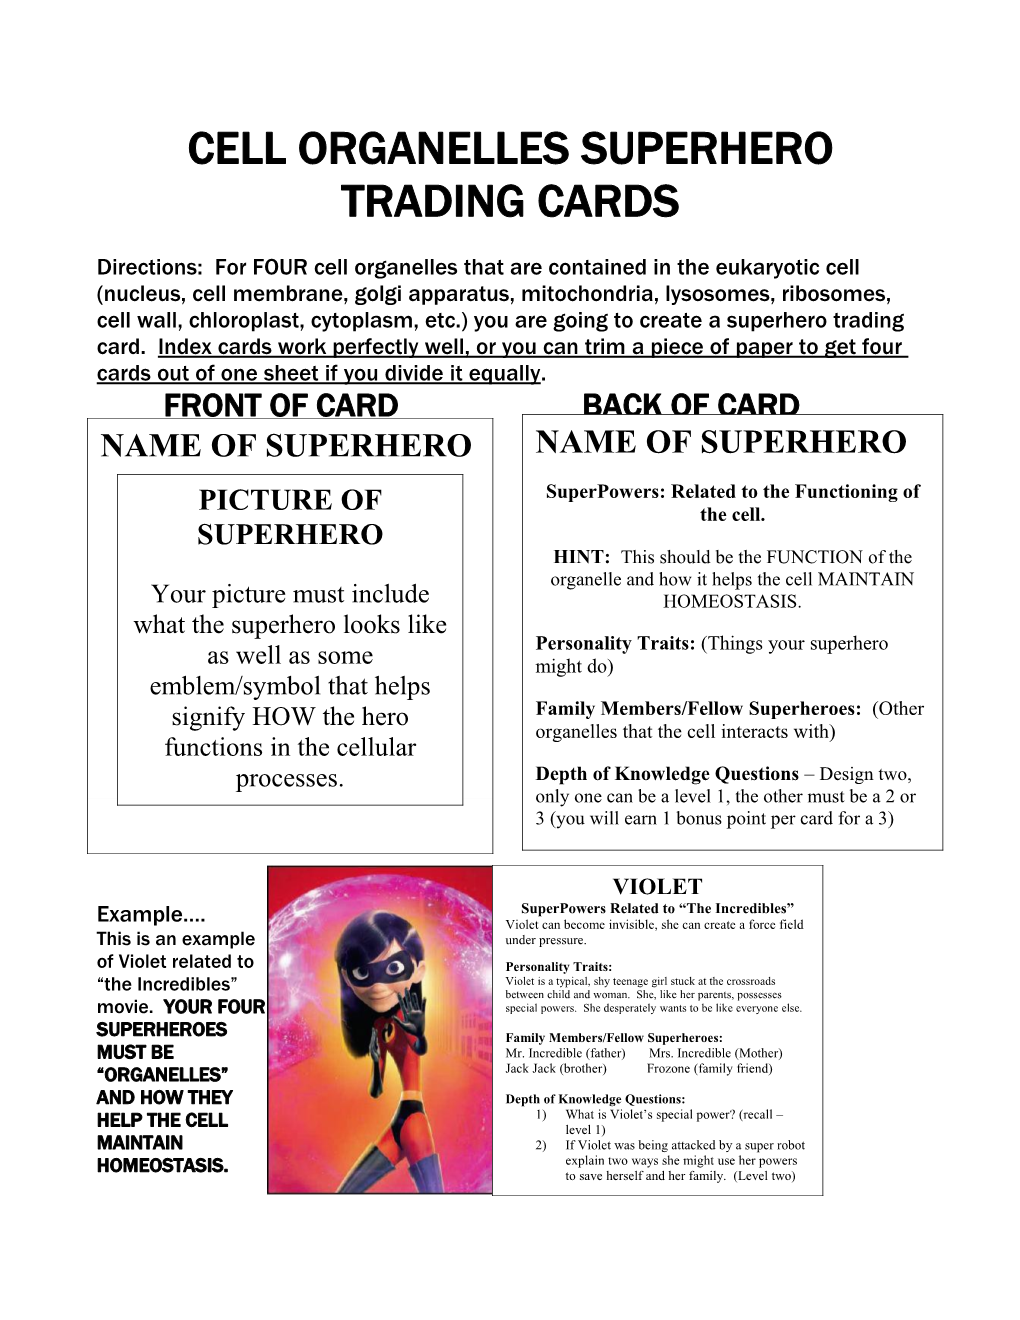 Cell Organelles Superhero Trading Cards